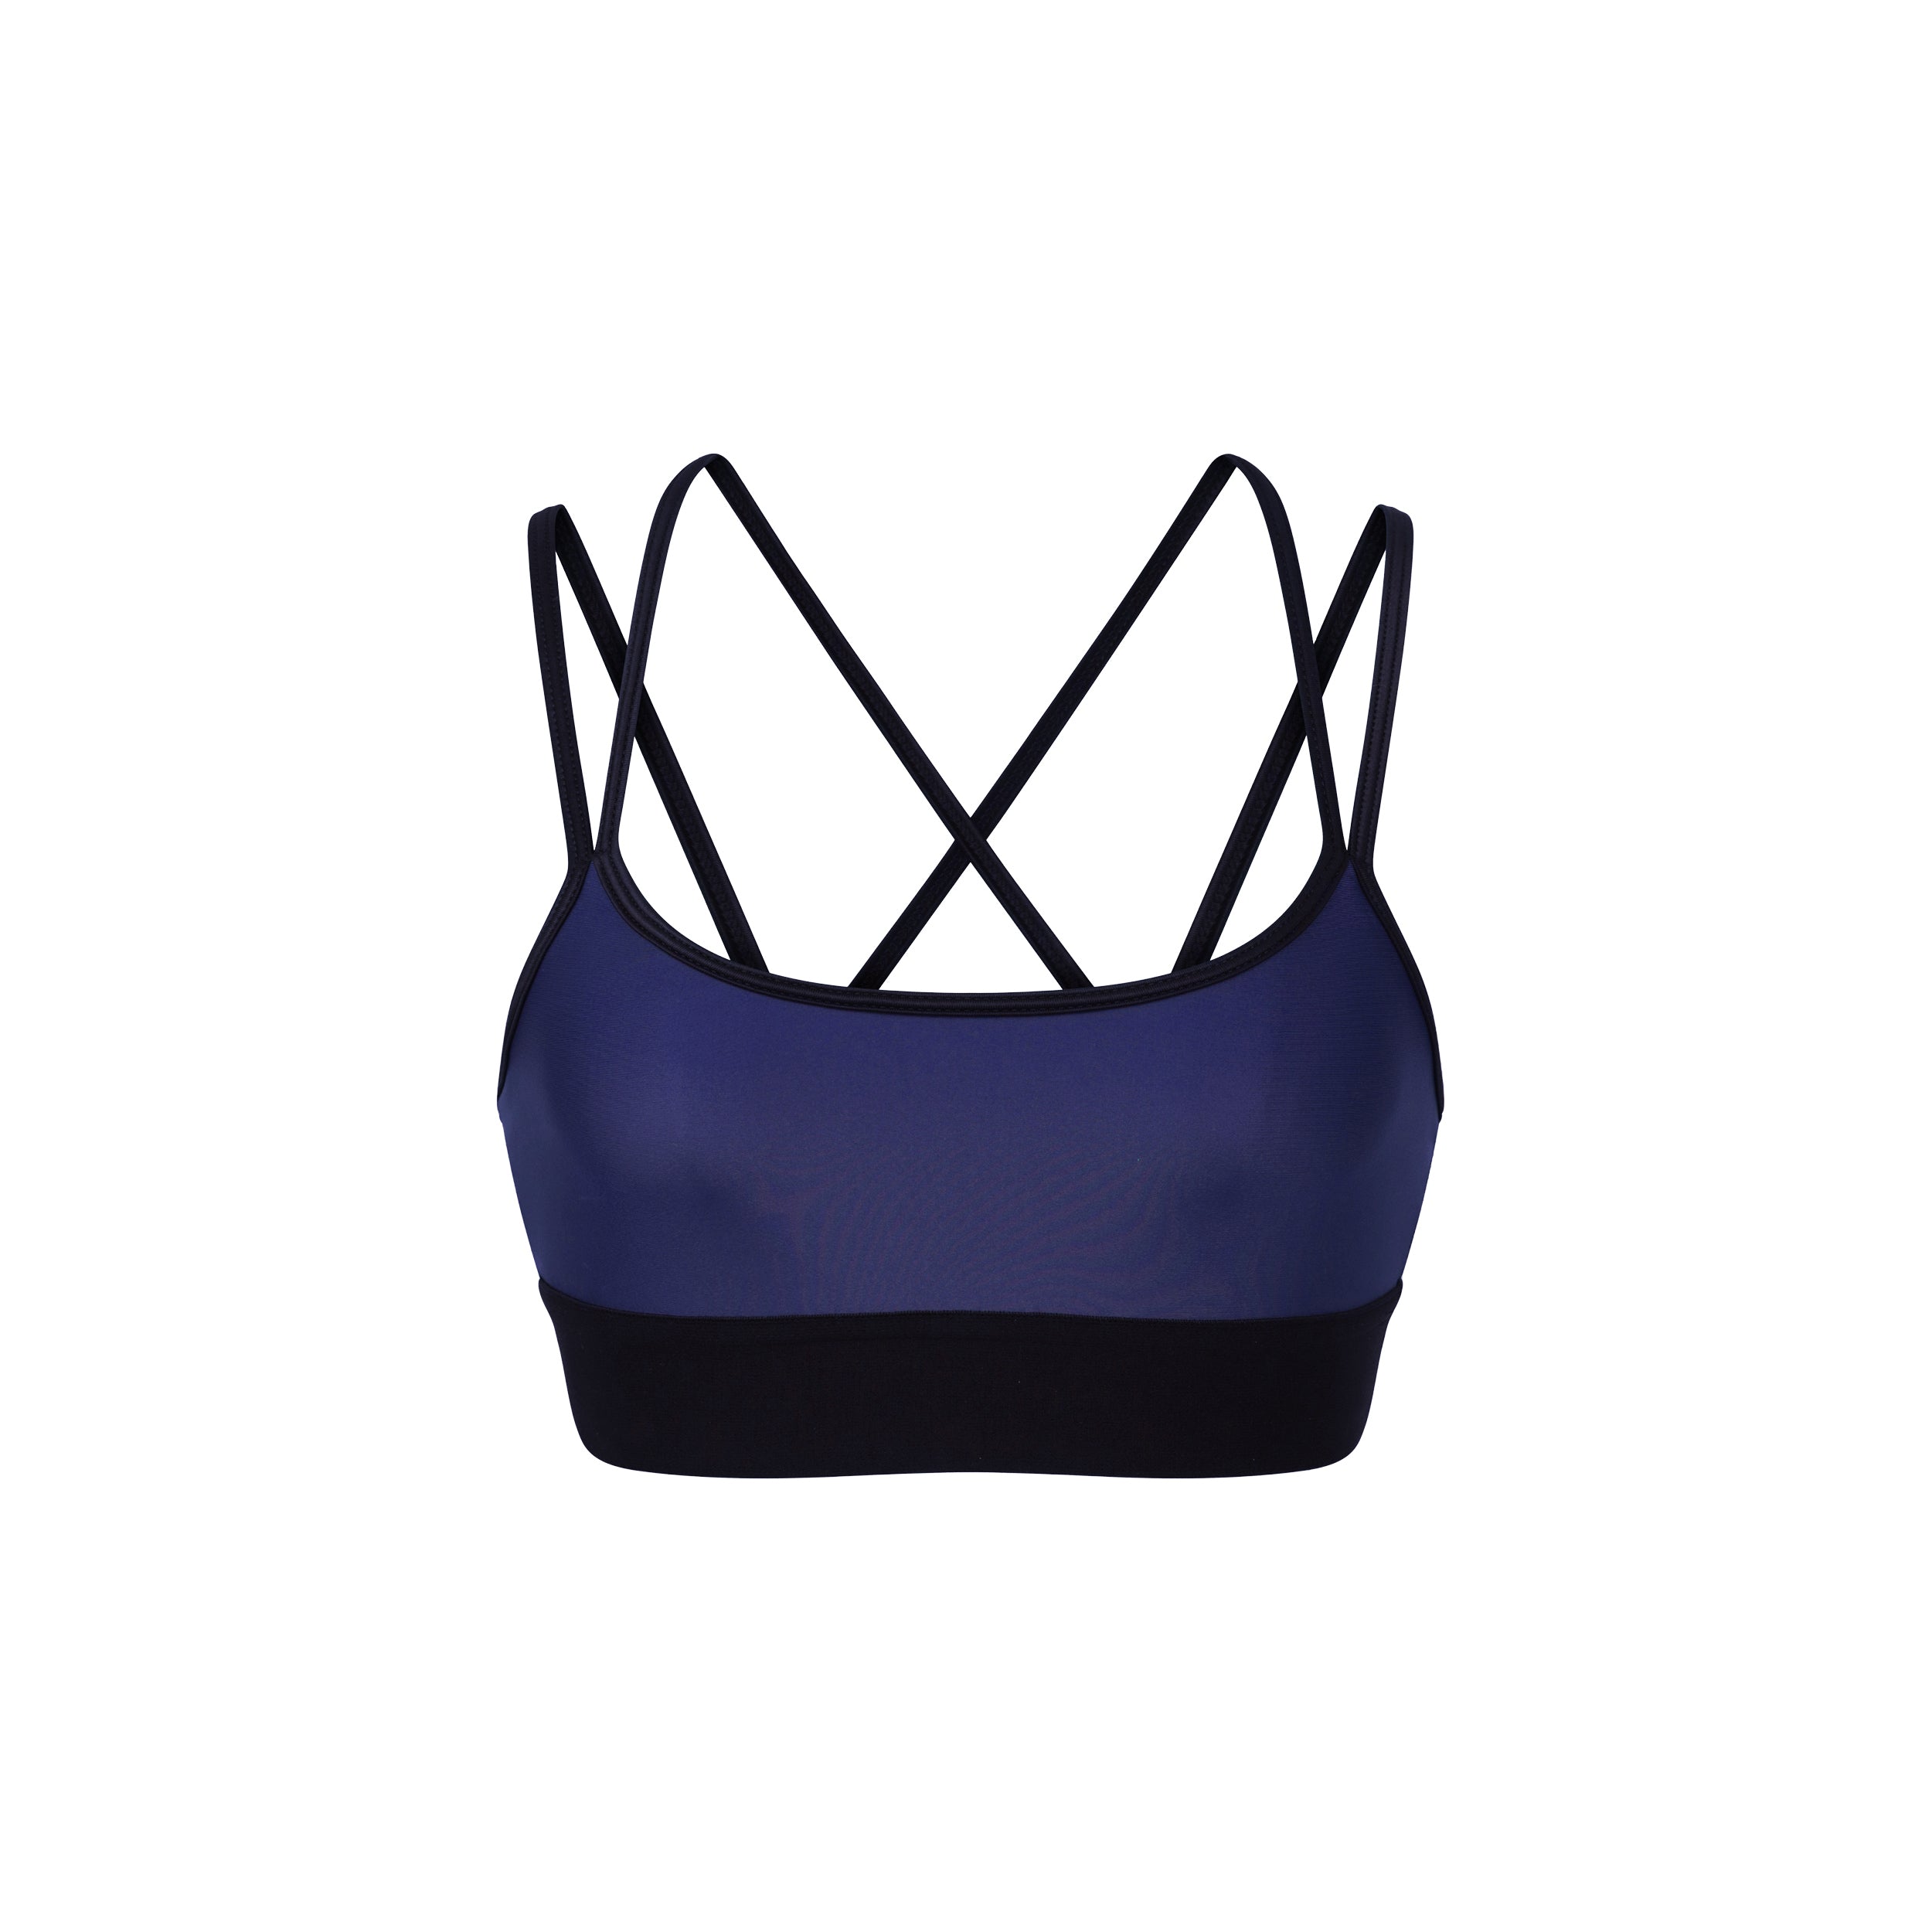 Product shot of navy blue gloss liquid sports bra featuring a scoop neckline and an alluring strappy back with a supportive elastic band